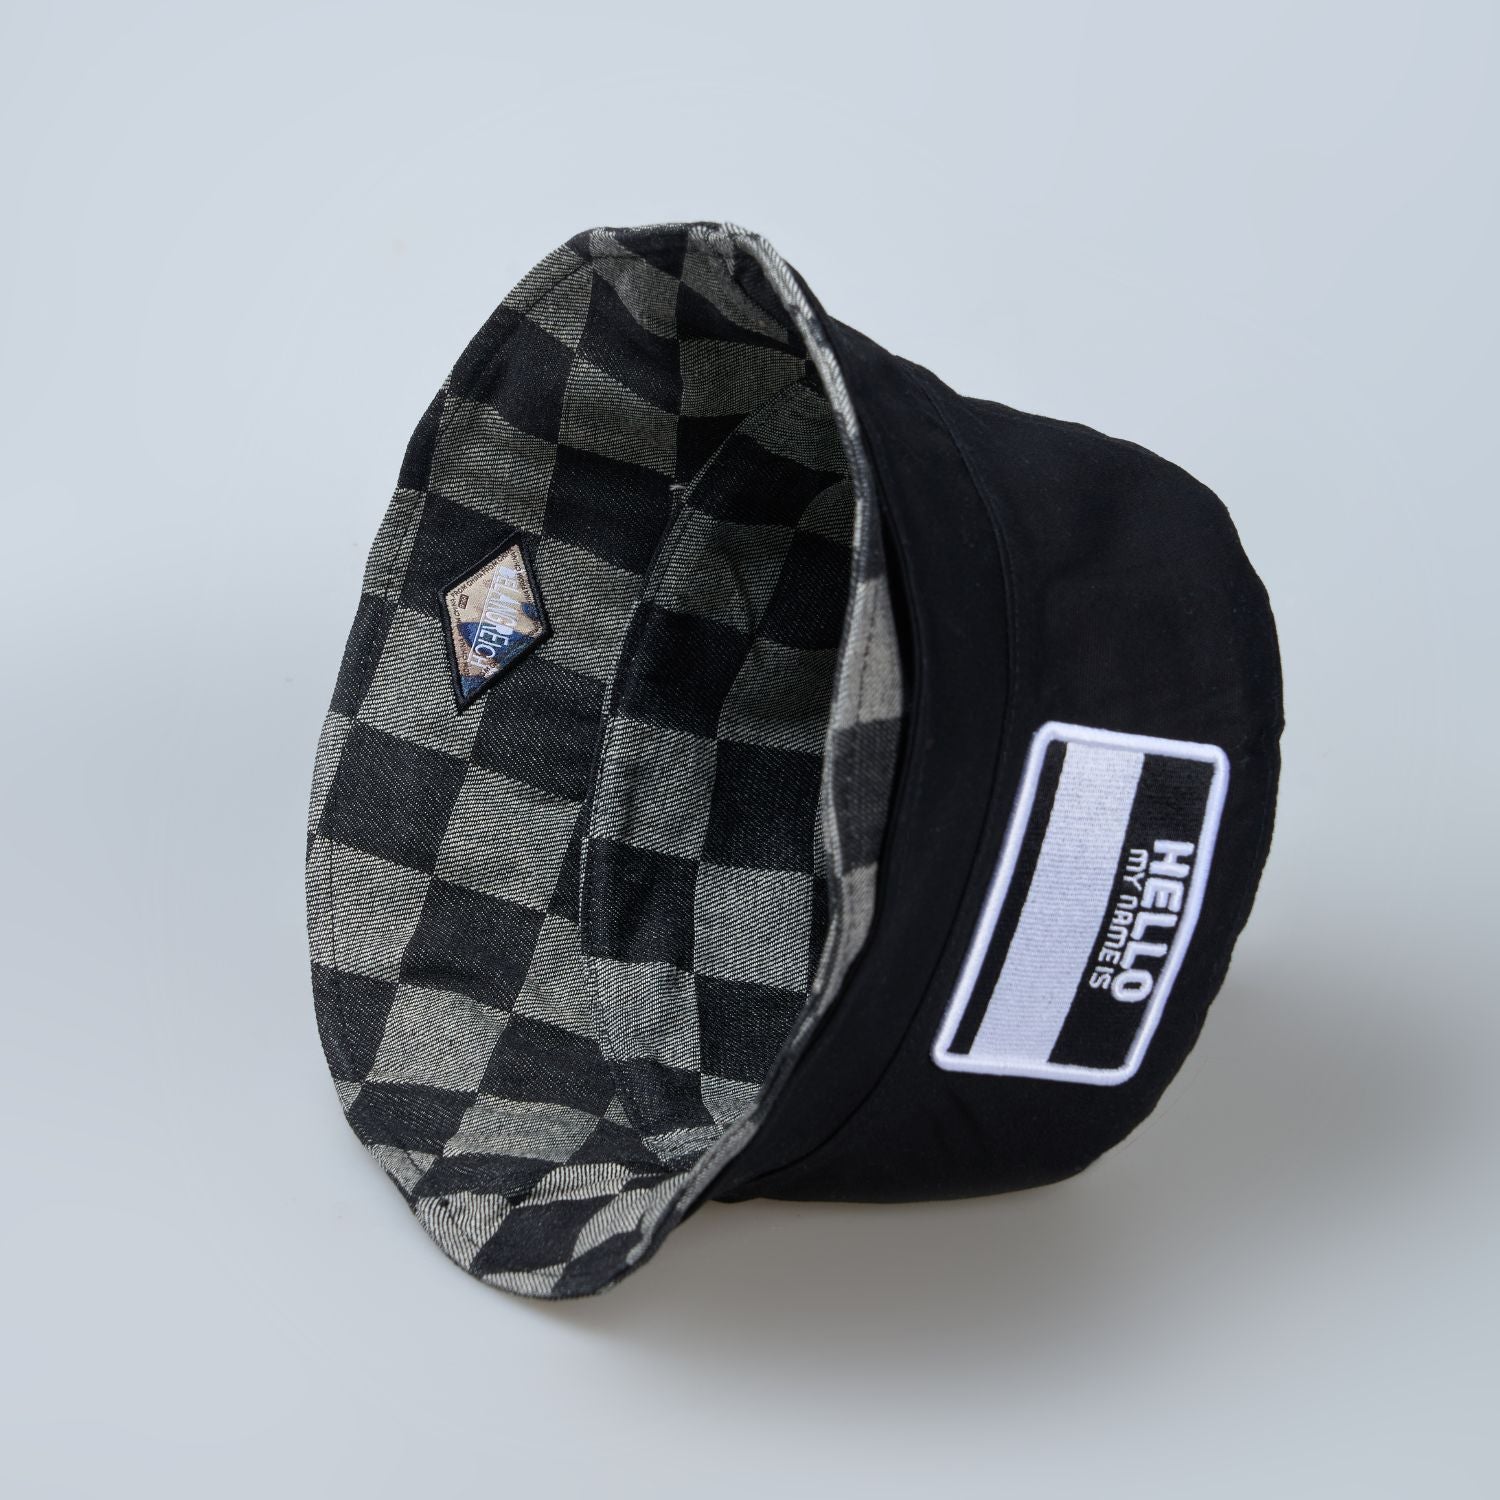 Black colored, chequered pattern, lightweight bucket hat for men, side view.